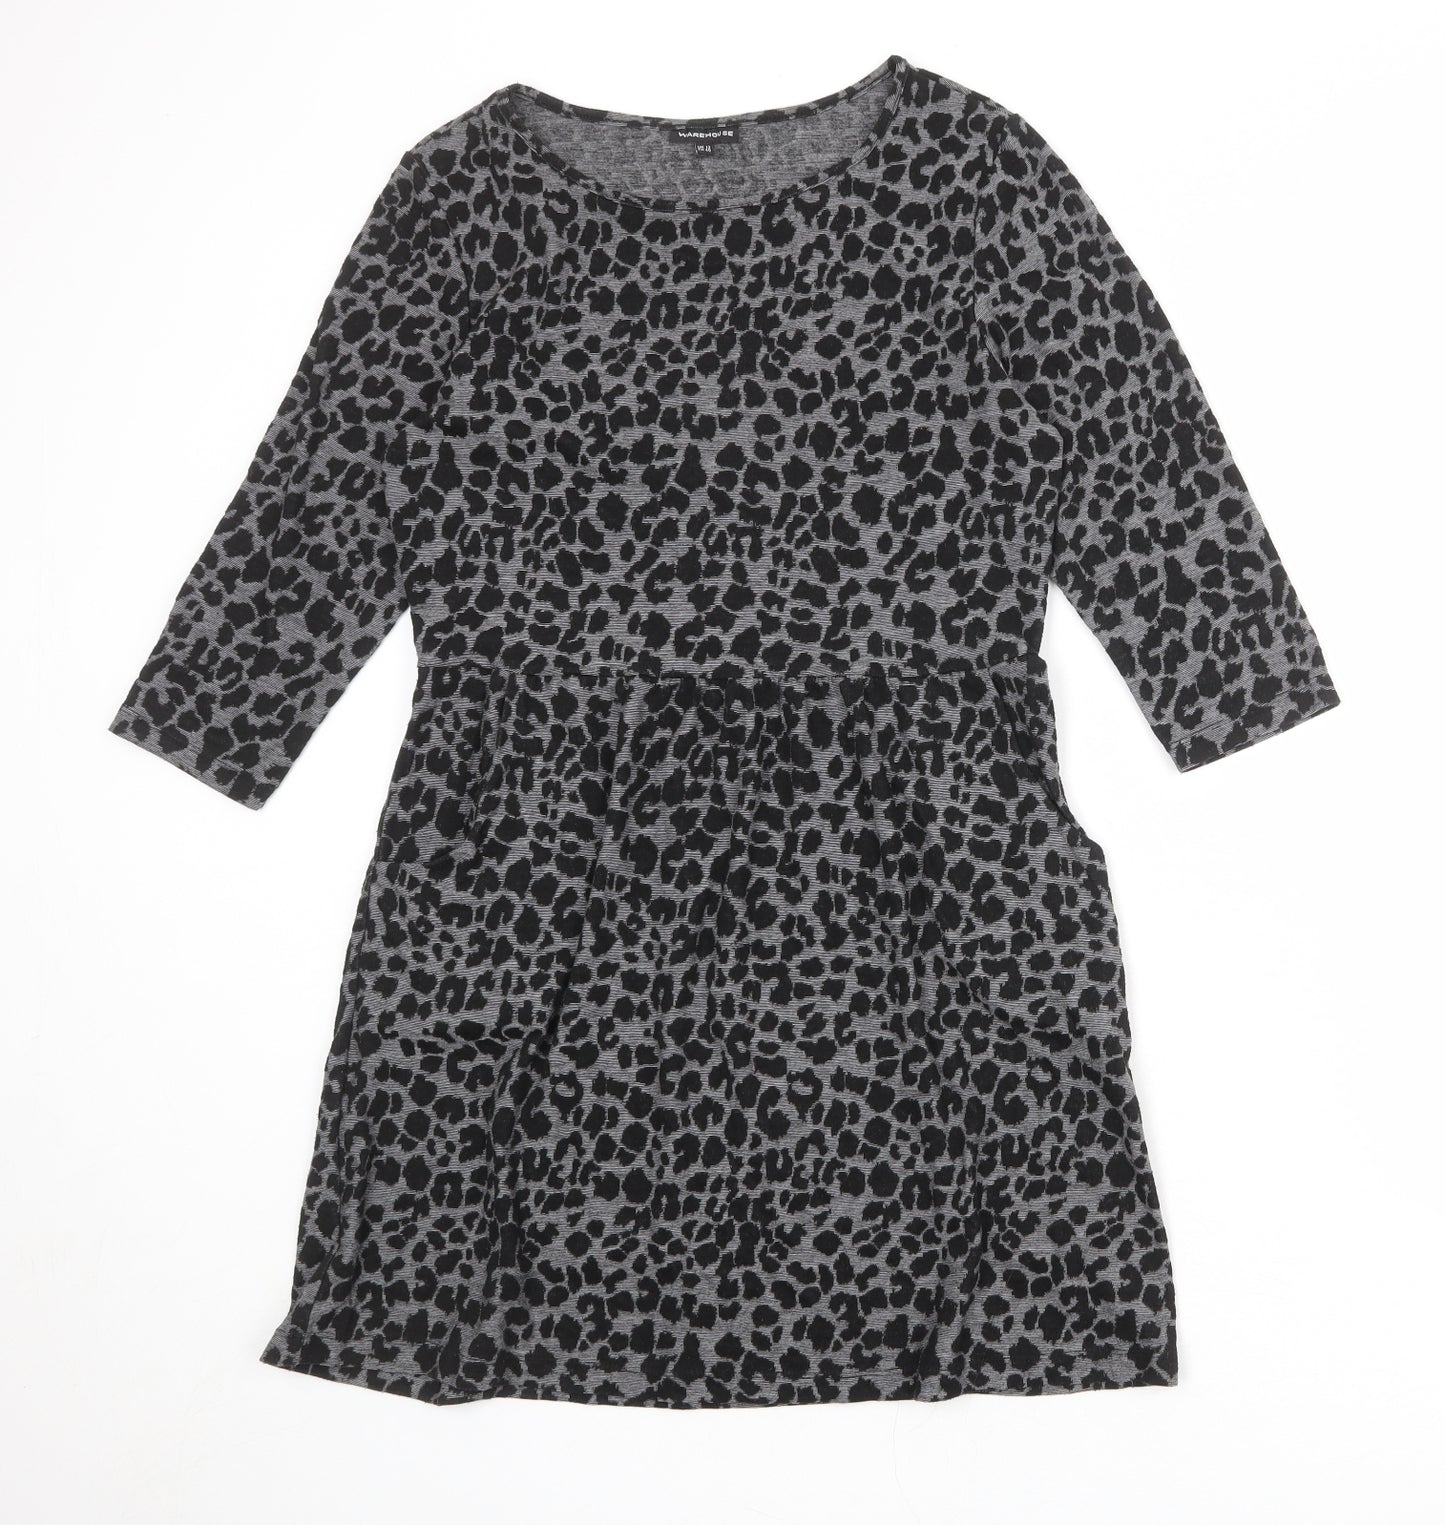 Warehouse Womens Grey Animal Print Polyester Jumper Dress Size 12 Round Neck Pullover - Leopard pattern